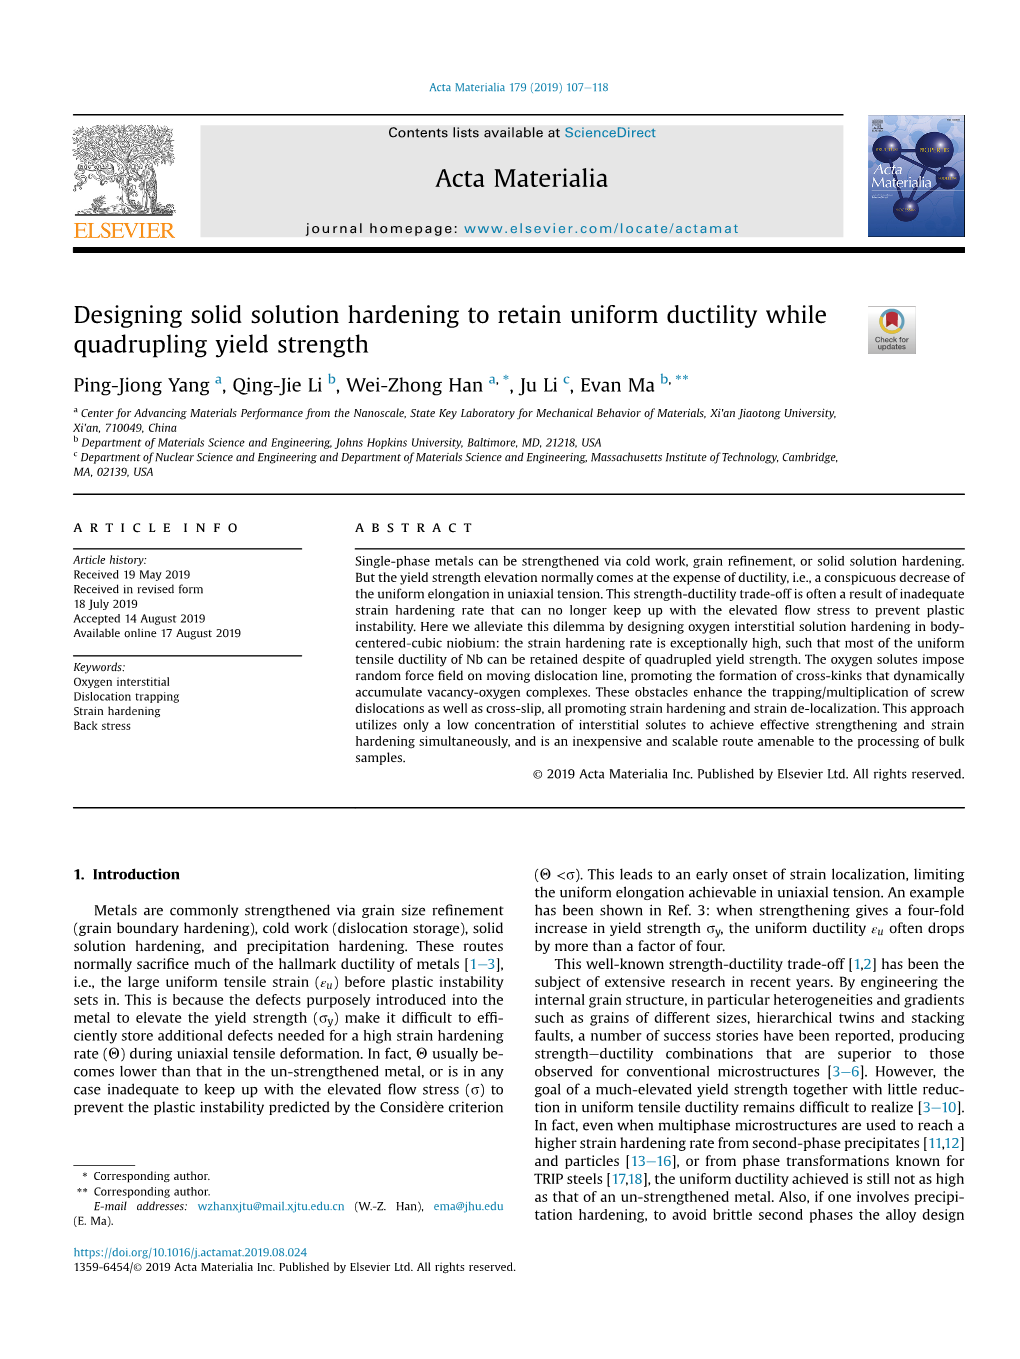 Designing Solid Solution Hardening to Retain Uniform Ductility While Quadrupling Yield Strength